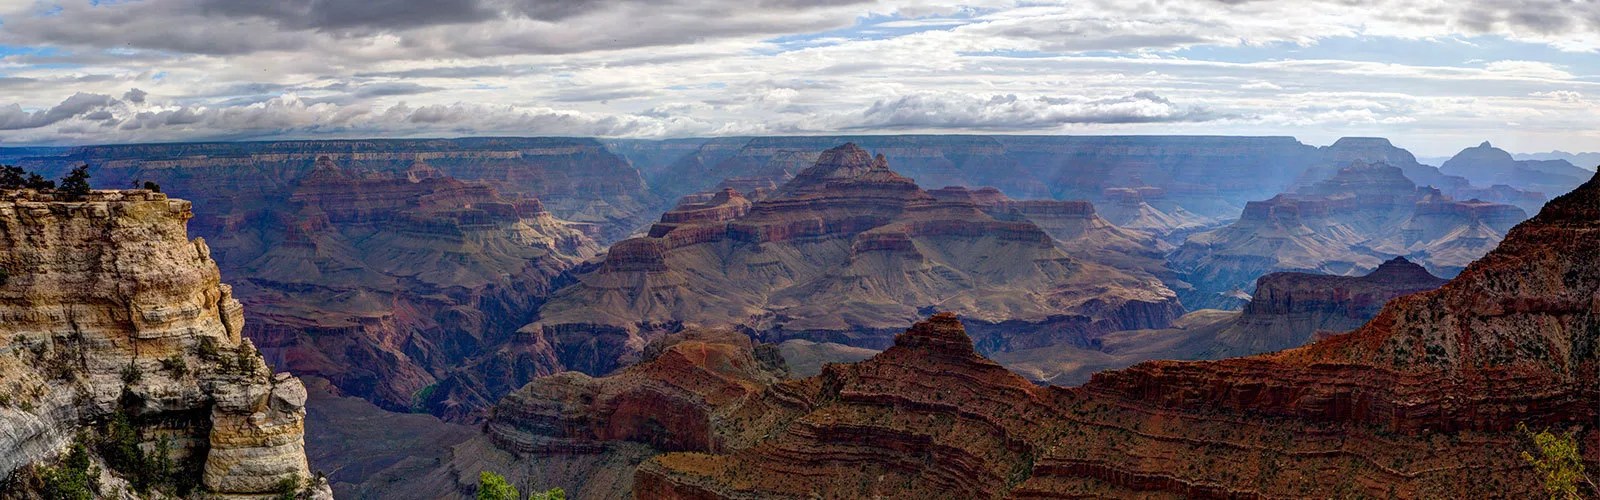 View of sprawling Grand Canyon showing many hues of red rock and against a blue sky.